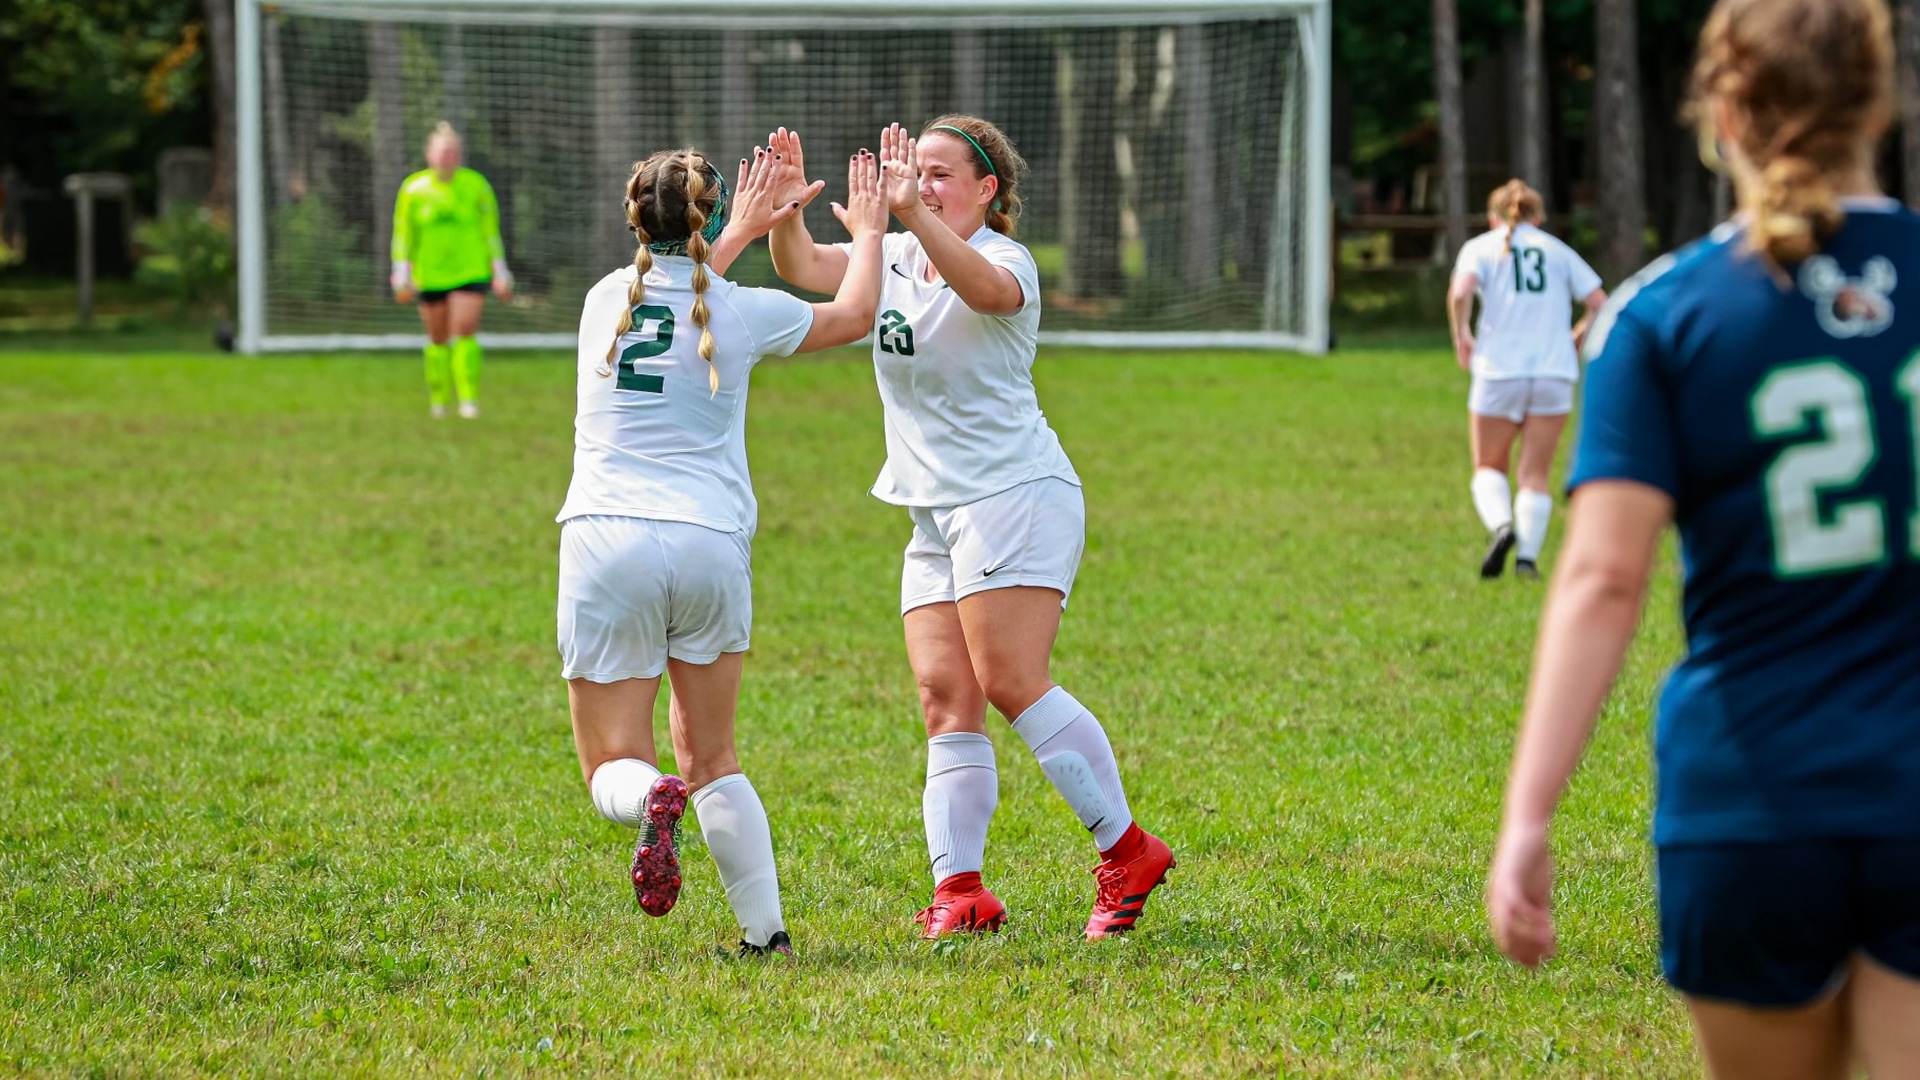 Samantha Severing (left #2) celebrates with Haven Bradt (right #25) after a goal (Mercedes Rideout photo). Thumbnail